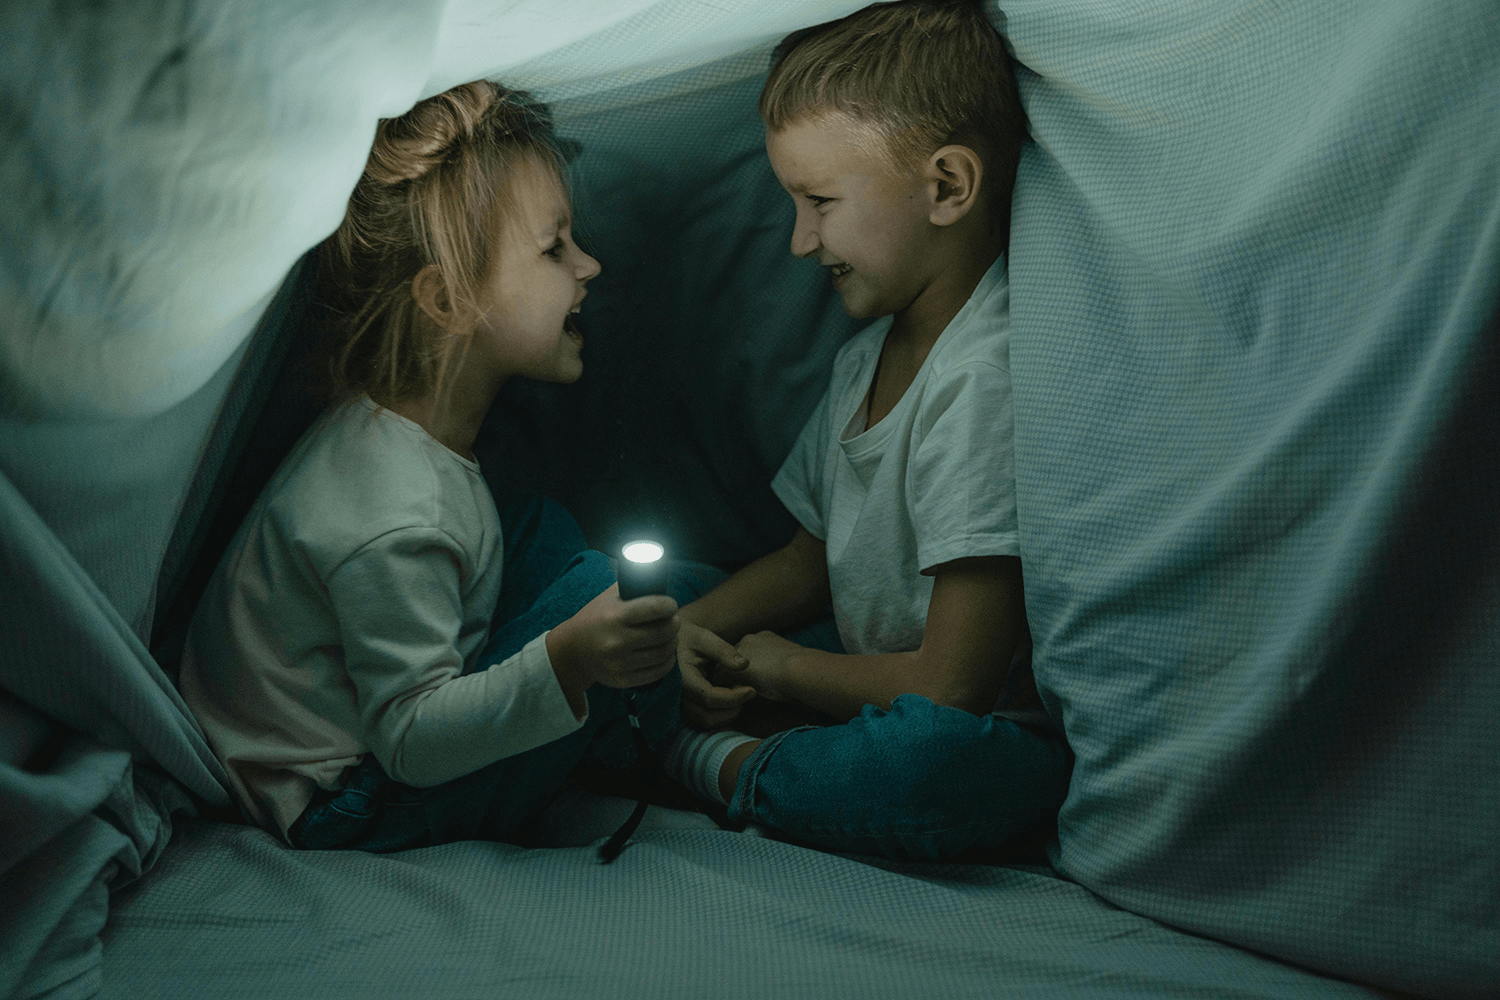 A boy and girl telling stories to each other in a blanket fort at story time.